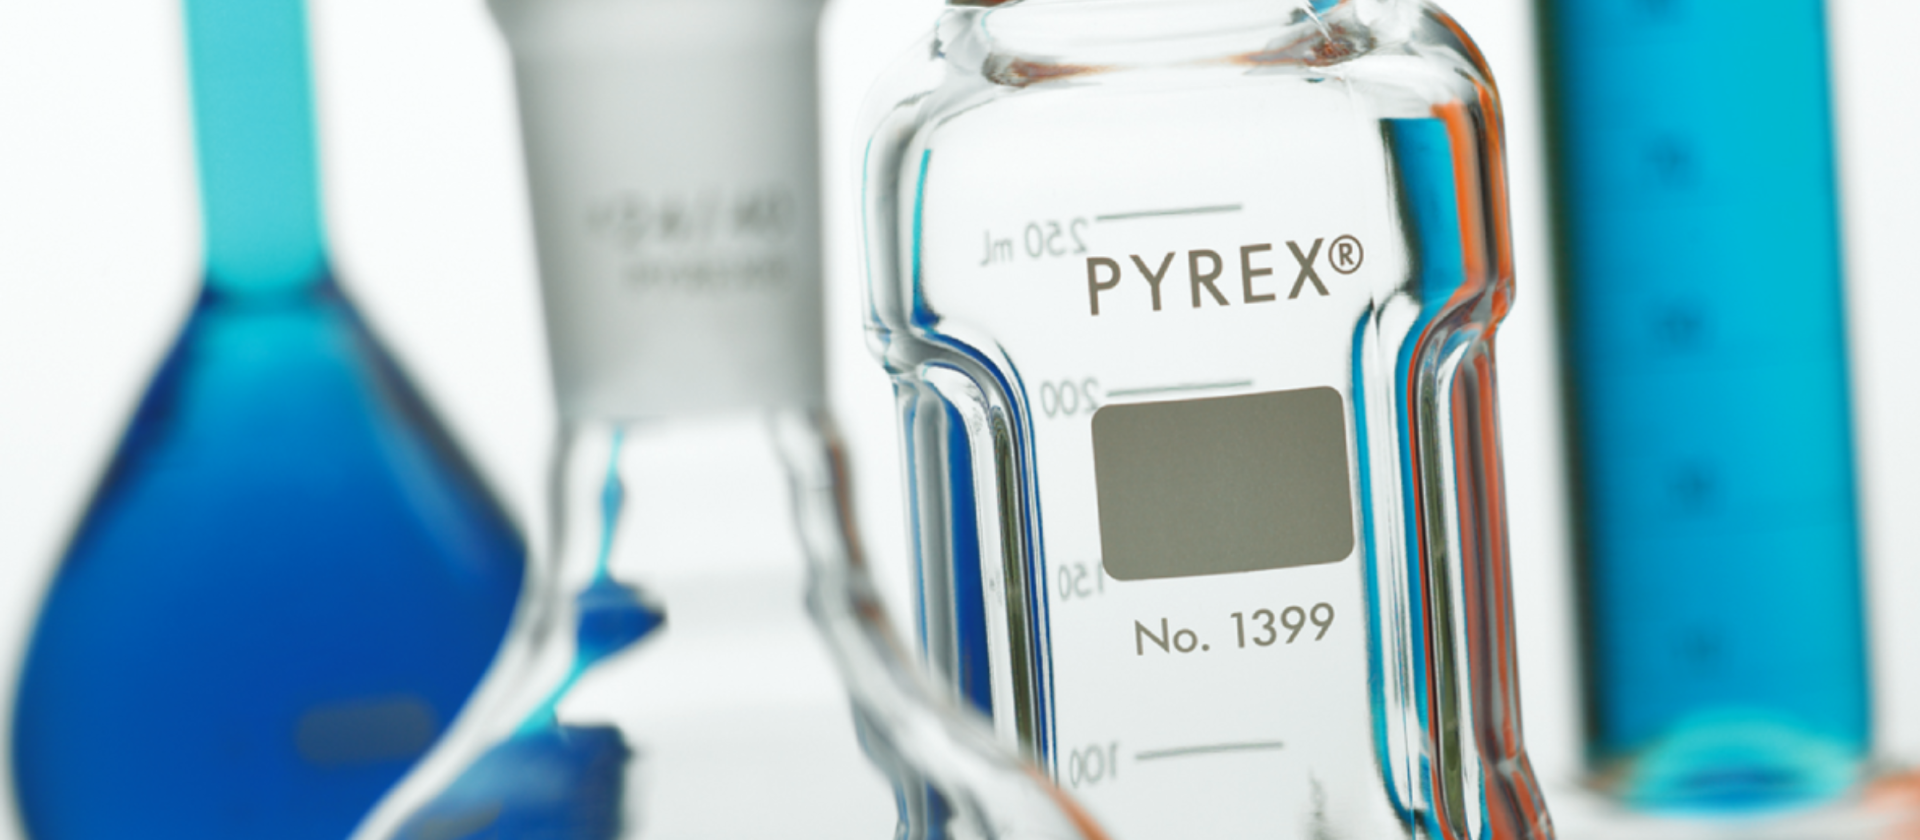 What are the temperature limits for Pyrex glassware?